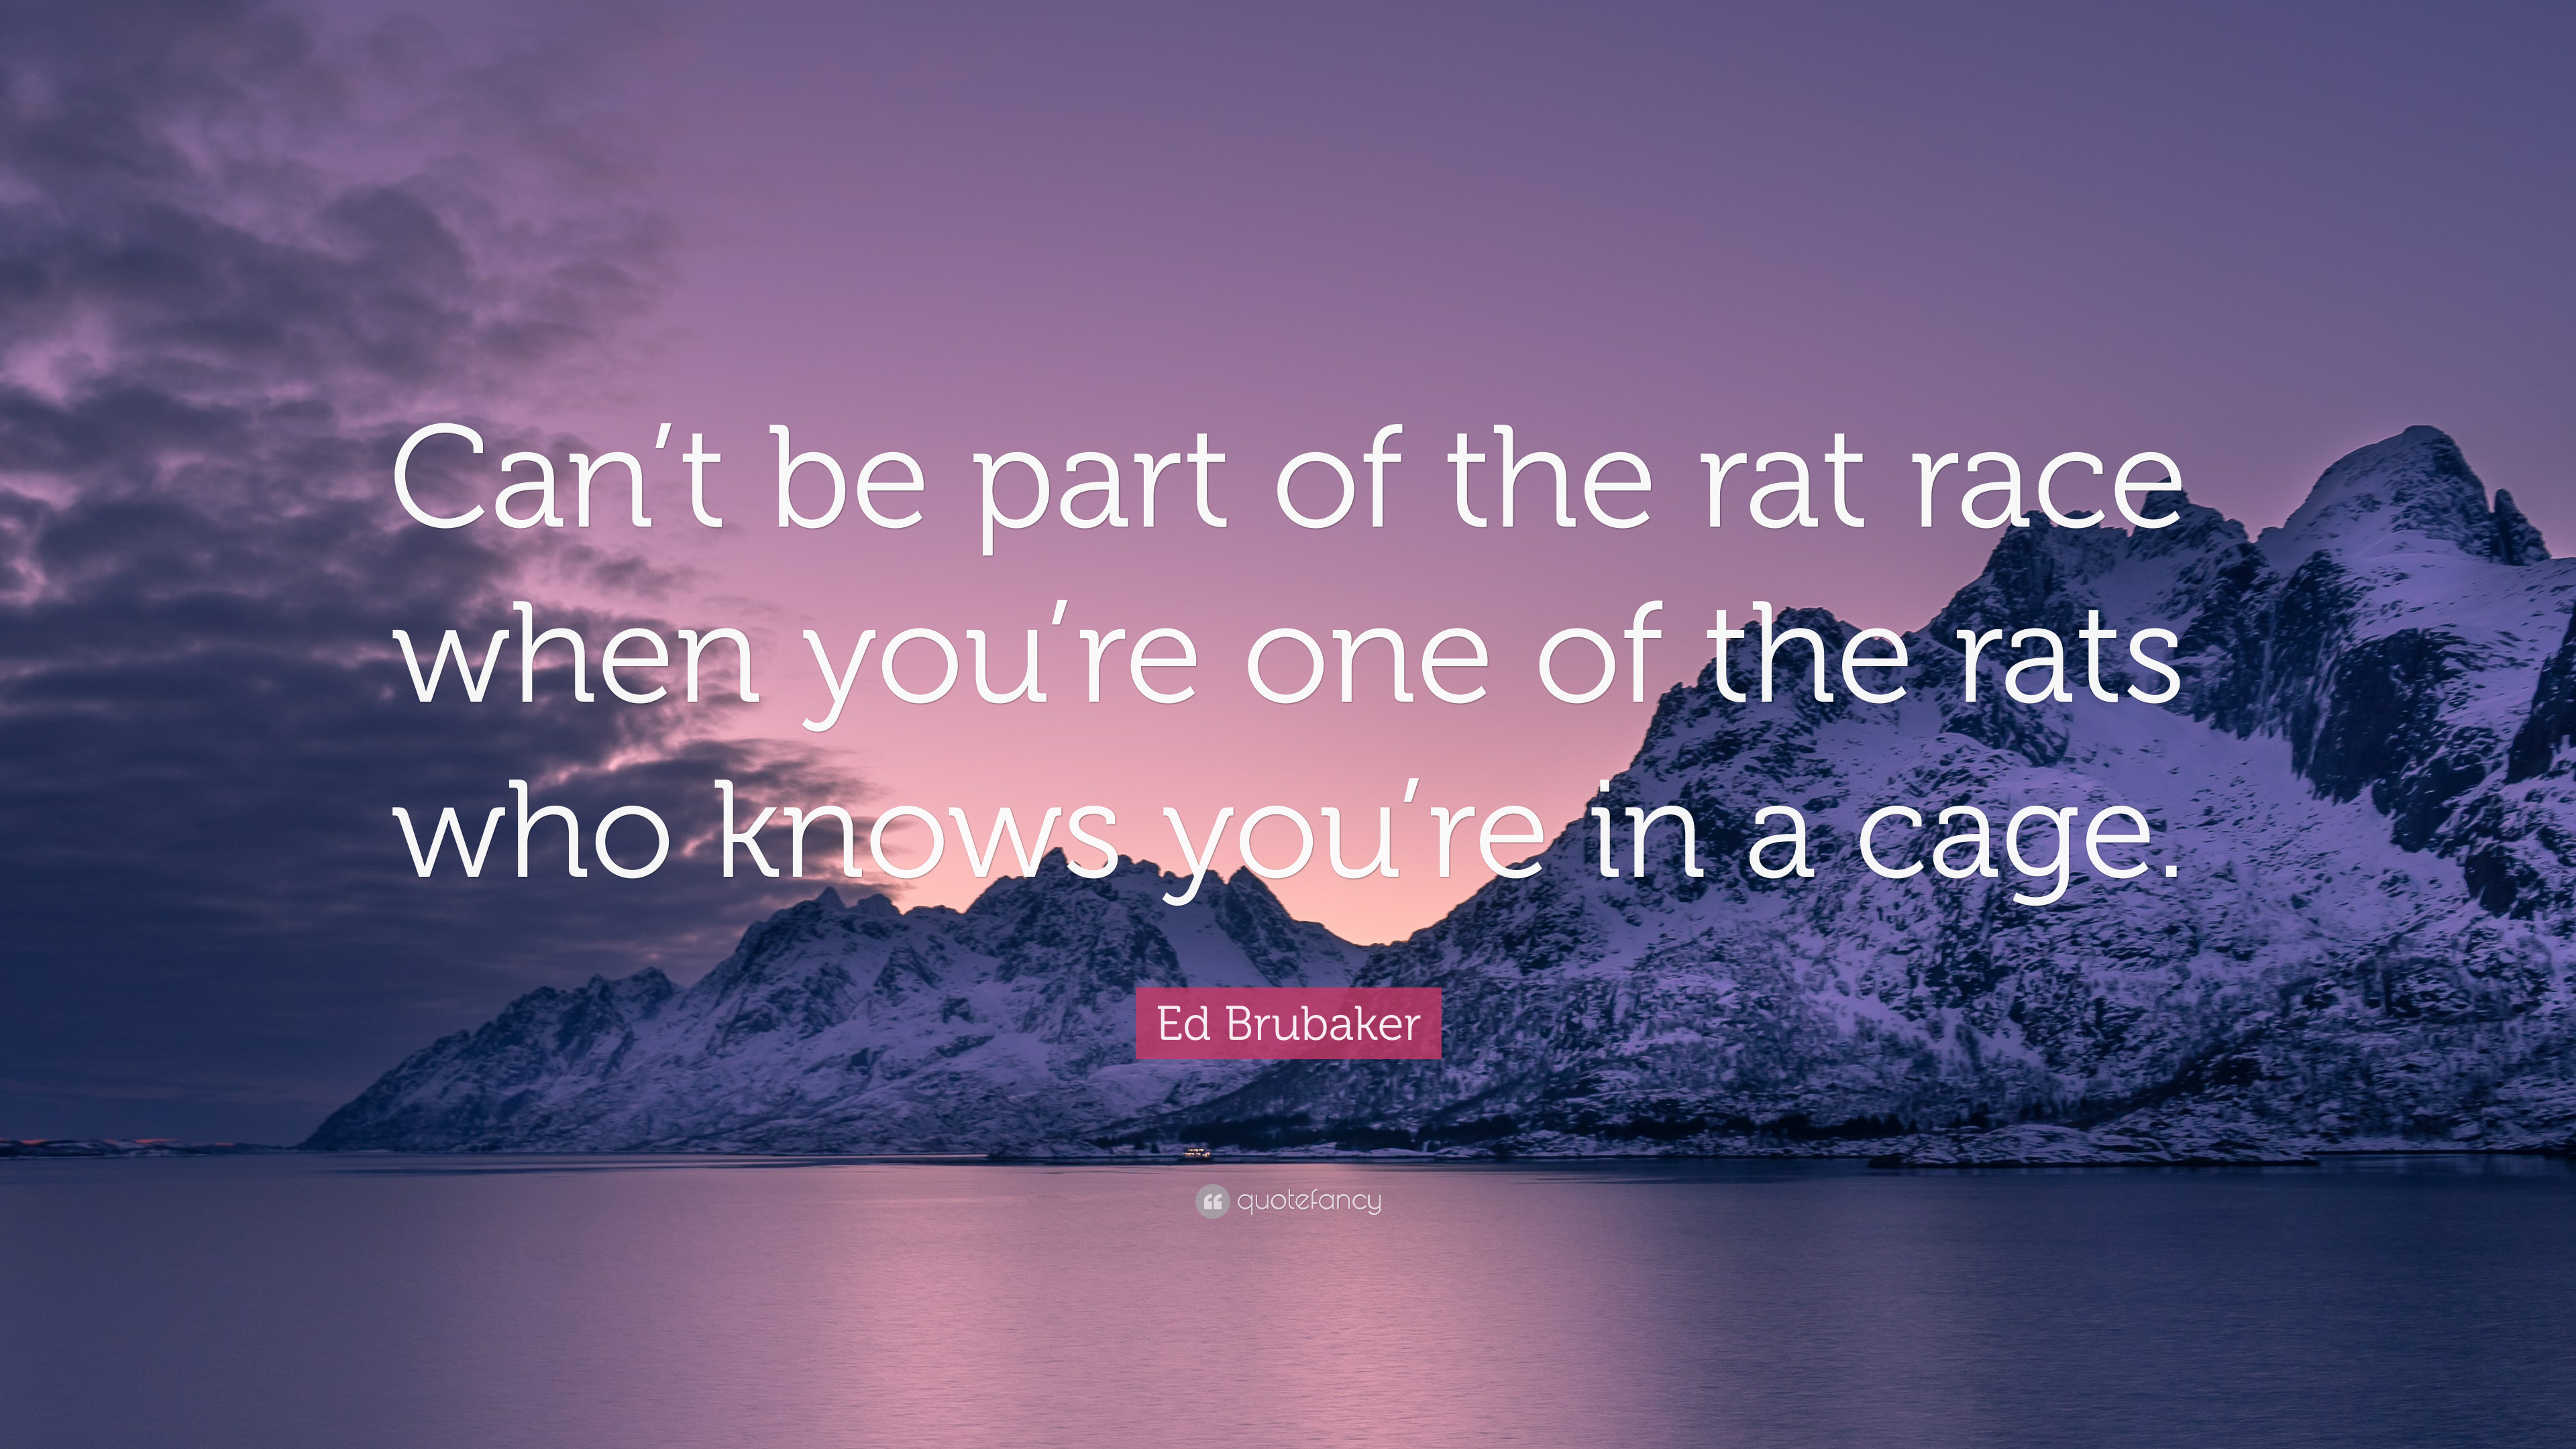 Ed Brubaker Quote: “Can't be part of the rat race when you're one of